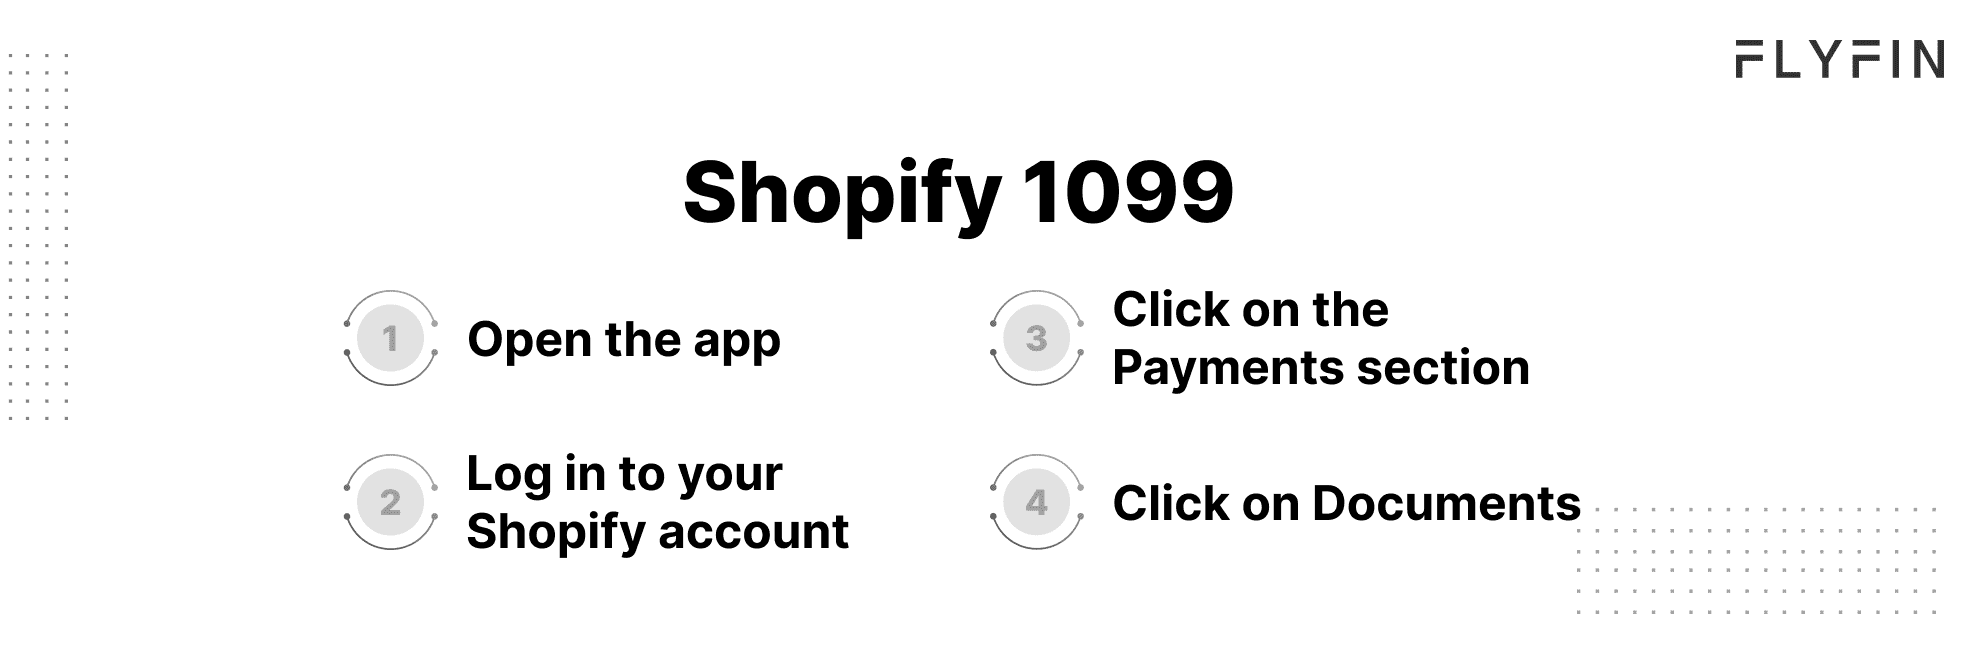 How to get 1099 from Shopify